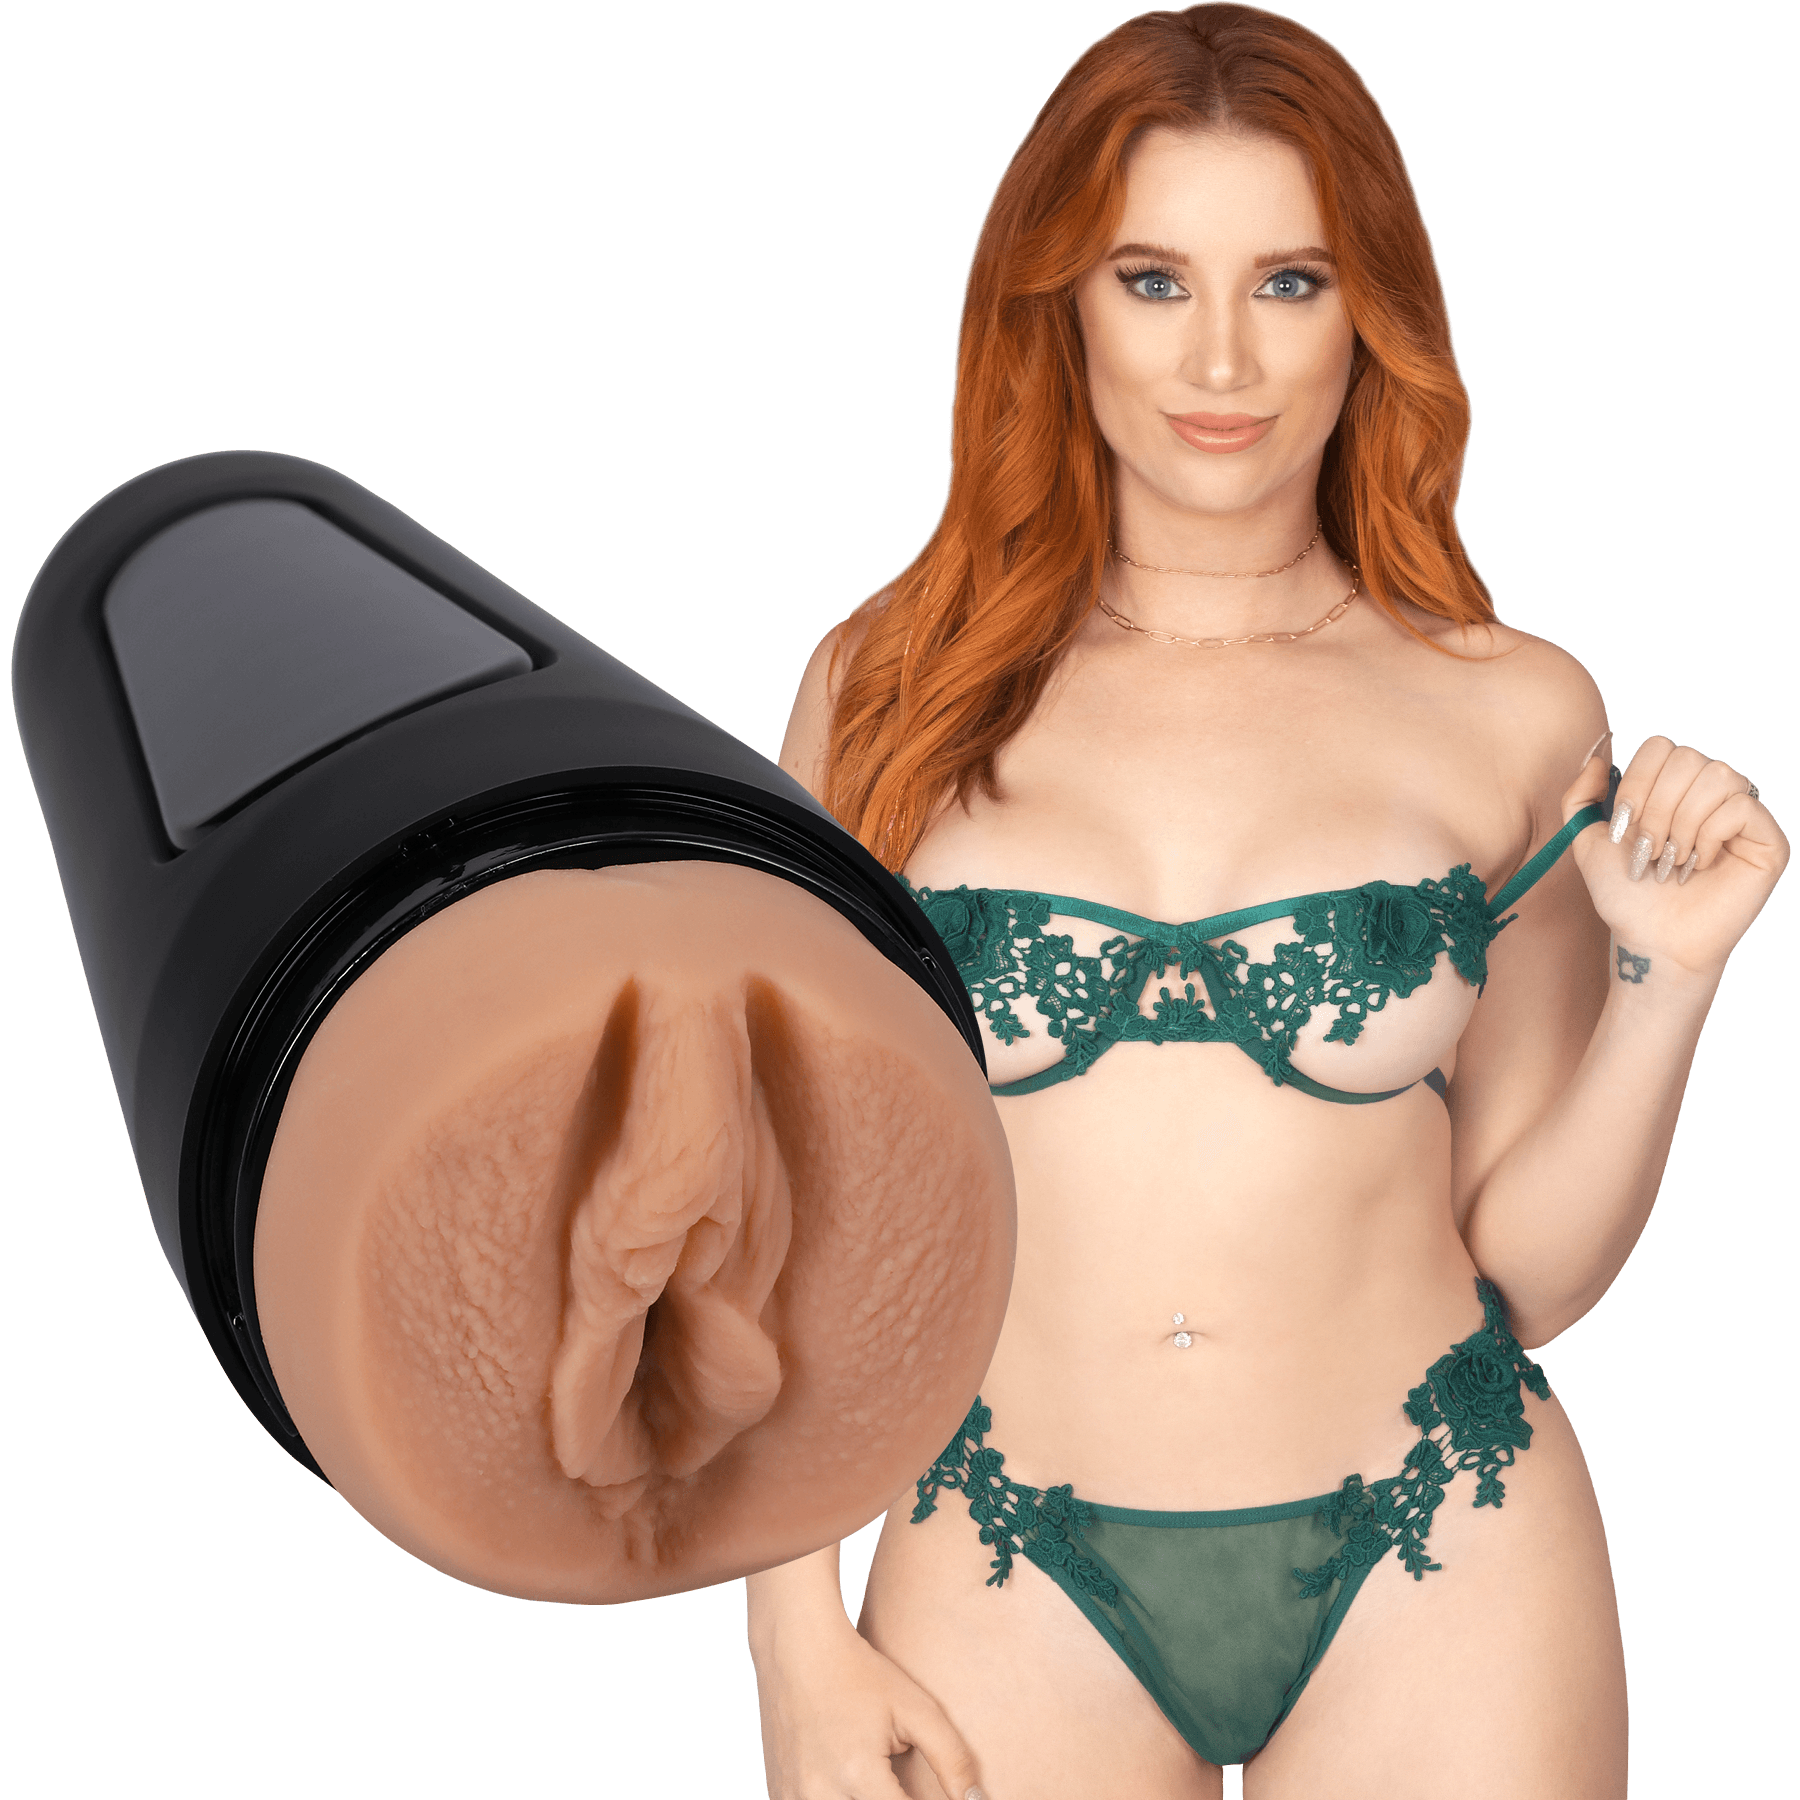 Main Squeeze Madison Morgan Stroker - Buy At Luxury Toy X - Free 3-Day Shipping